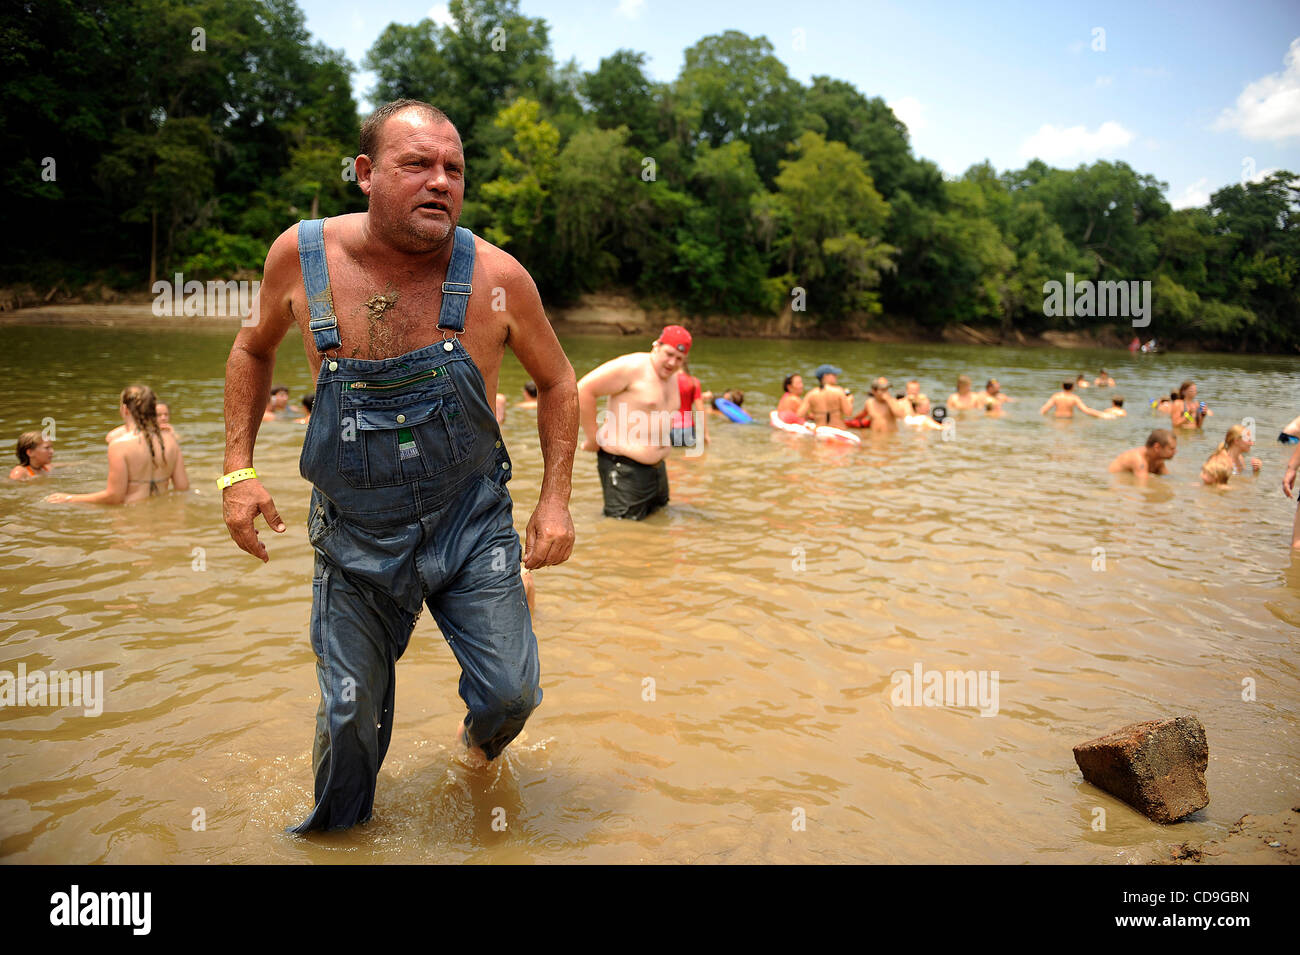 SATURDAY JULY 10, 2010 EAST DUBLIN, GEORGIA -A drunk Redneck Games participant  exits the river at Buckeye Park during the Redneck Games in East Dublin, Georgia. The games started in 1996 as spoof on the Olympics which were being held in Atlanta, Georgia at the time. participants compete in events l Stock Photo